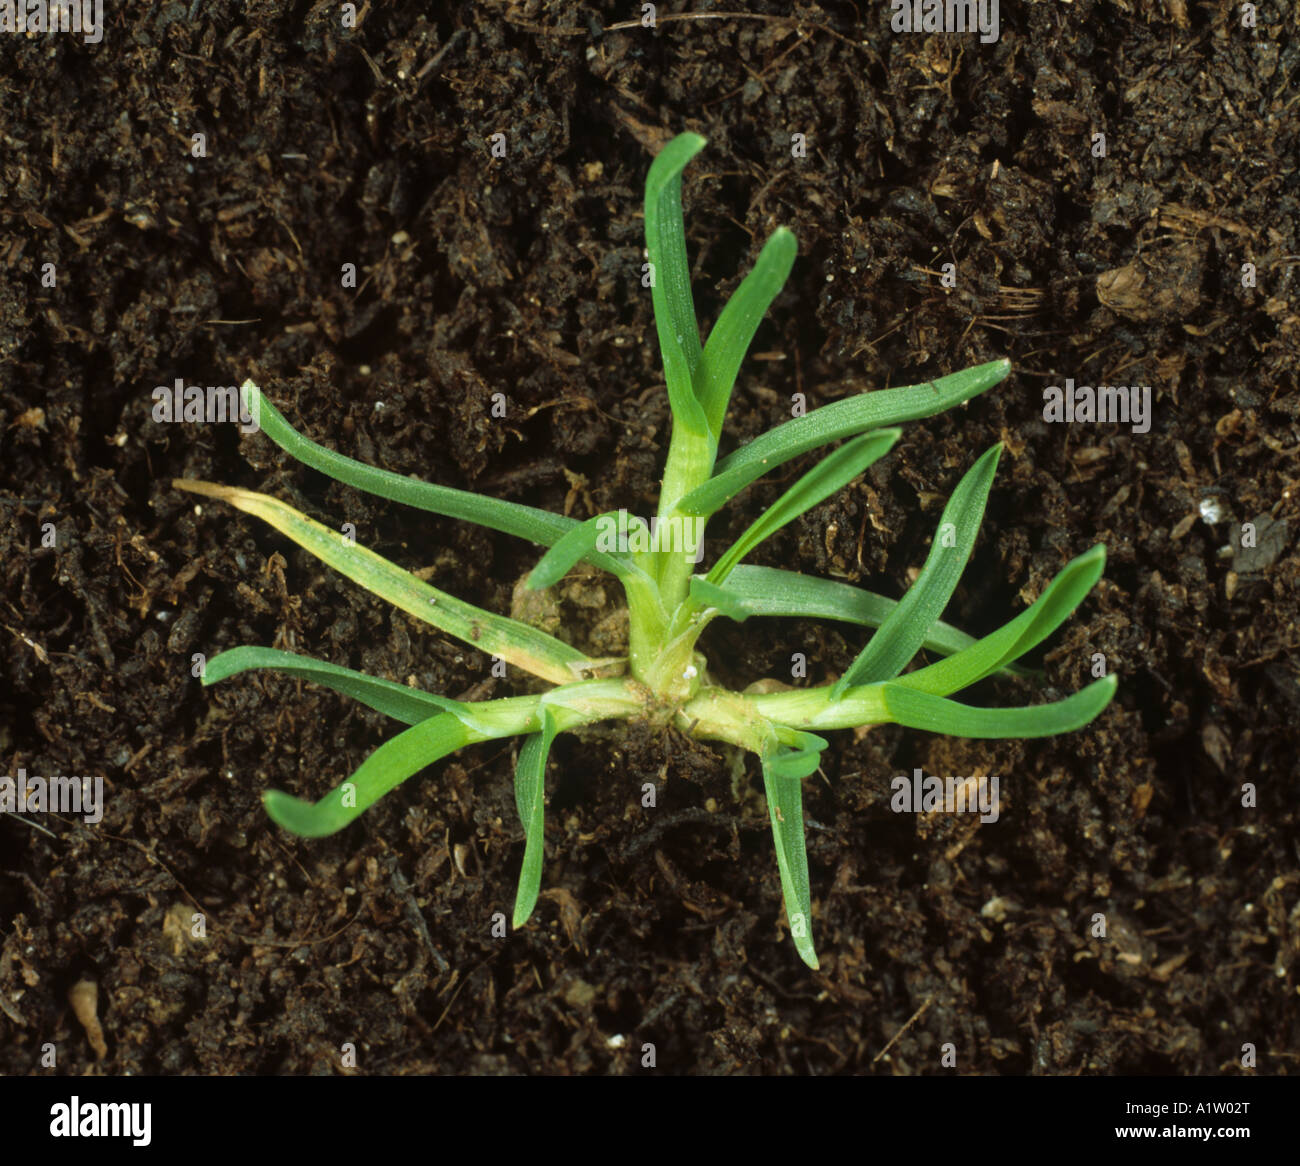 Annual meadow grass Poa annua young grass weed plant Stock Photo